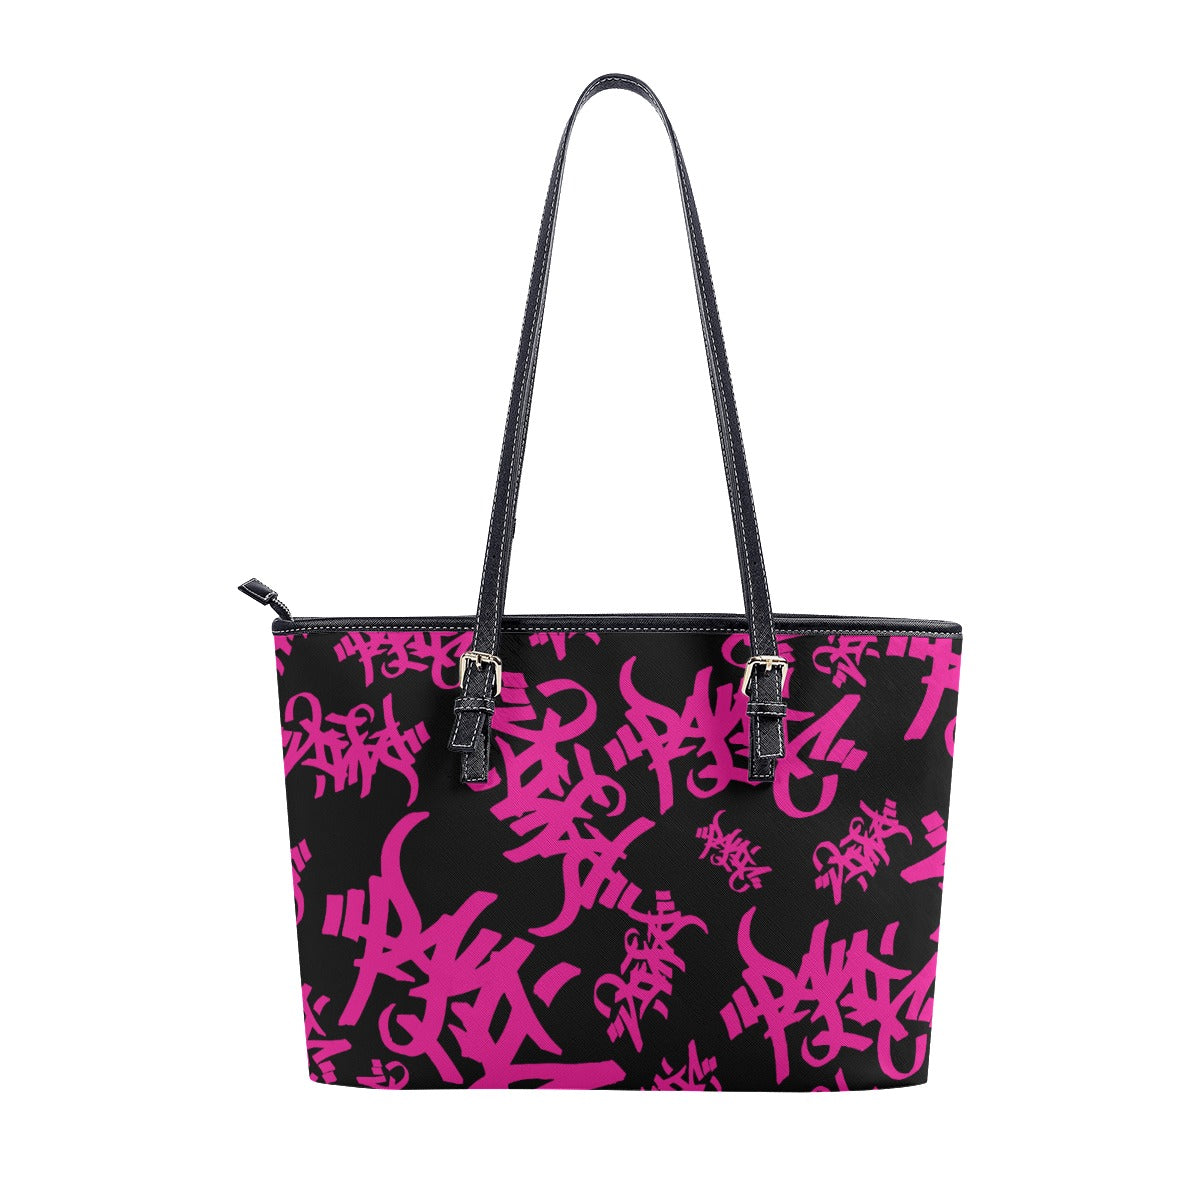 THE TAG FAUX LEATHER TOTE BAG - BLACK/HOT PINK - Panic 39